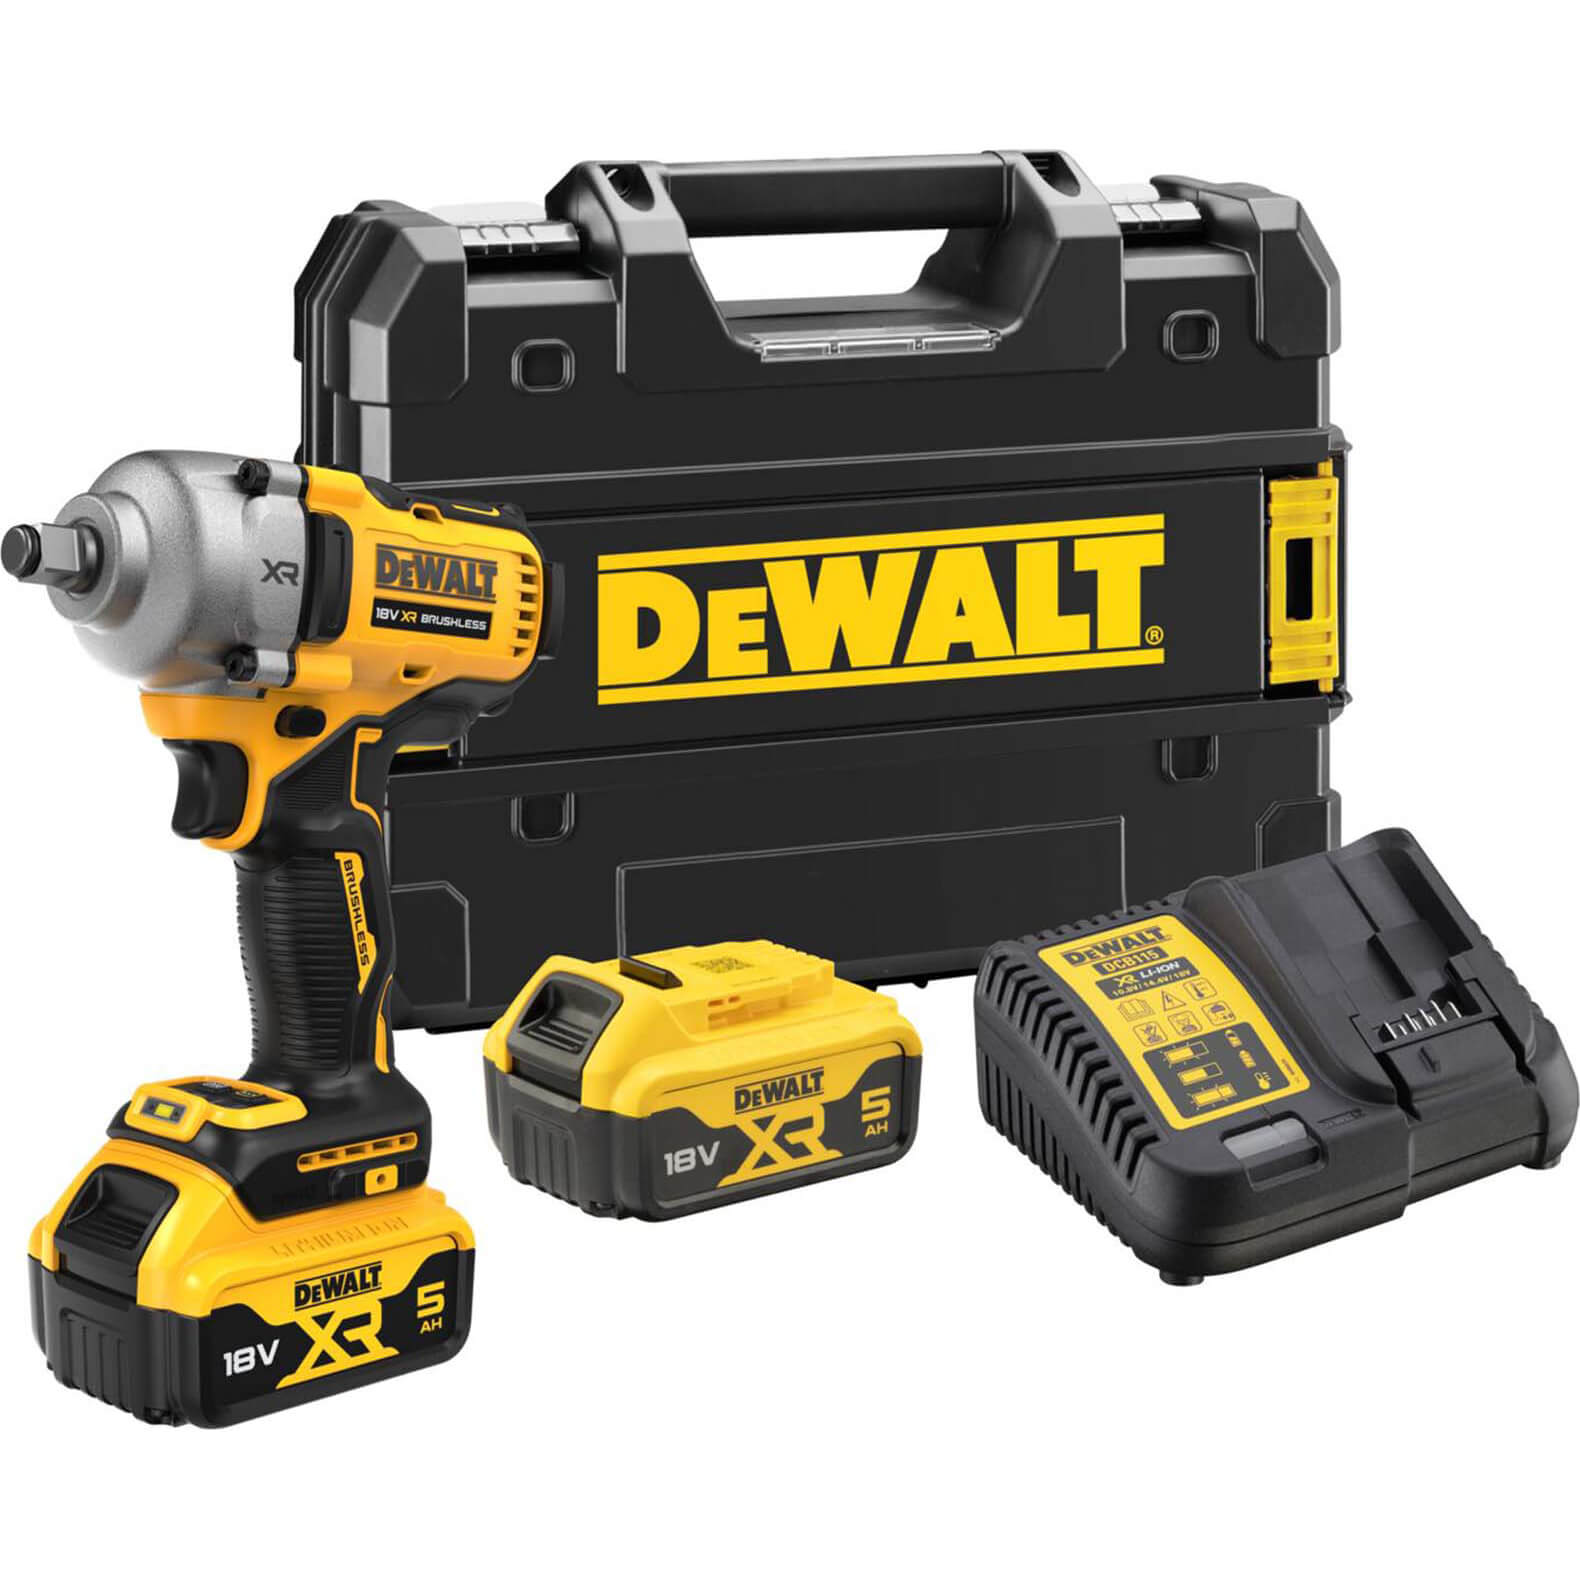 Image of DeWalt DCF891 18v XR Cordless Brushless 1/2" Compact High Torque Wrench 2 x 5ah Li-ion Charger Case